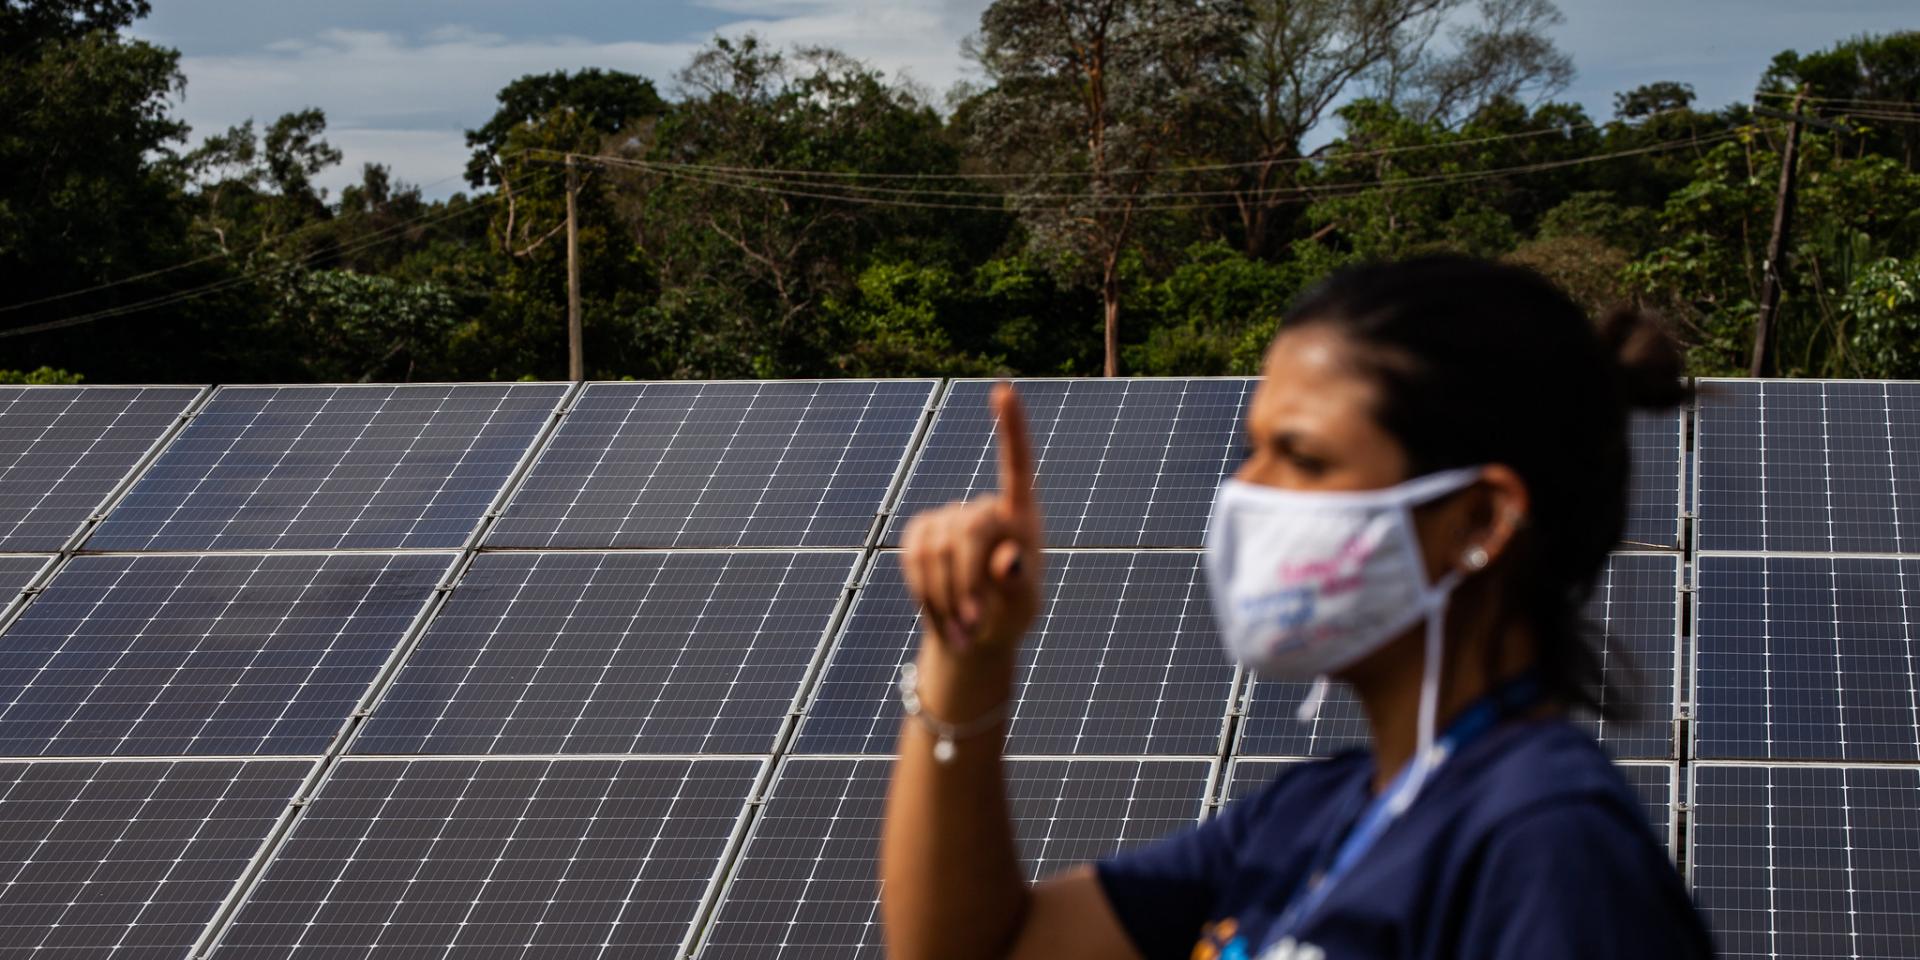 Fazenda Solar Bemol, located at kilometer 24 of Highway AM-010, in Manaus, state of Amazonas, Brazil, is the largest solar energy farm in the northern region of Brazil.